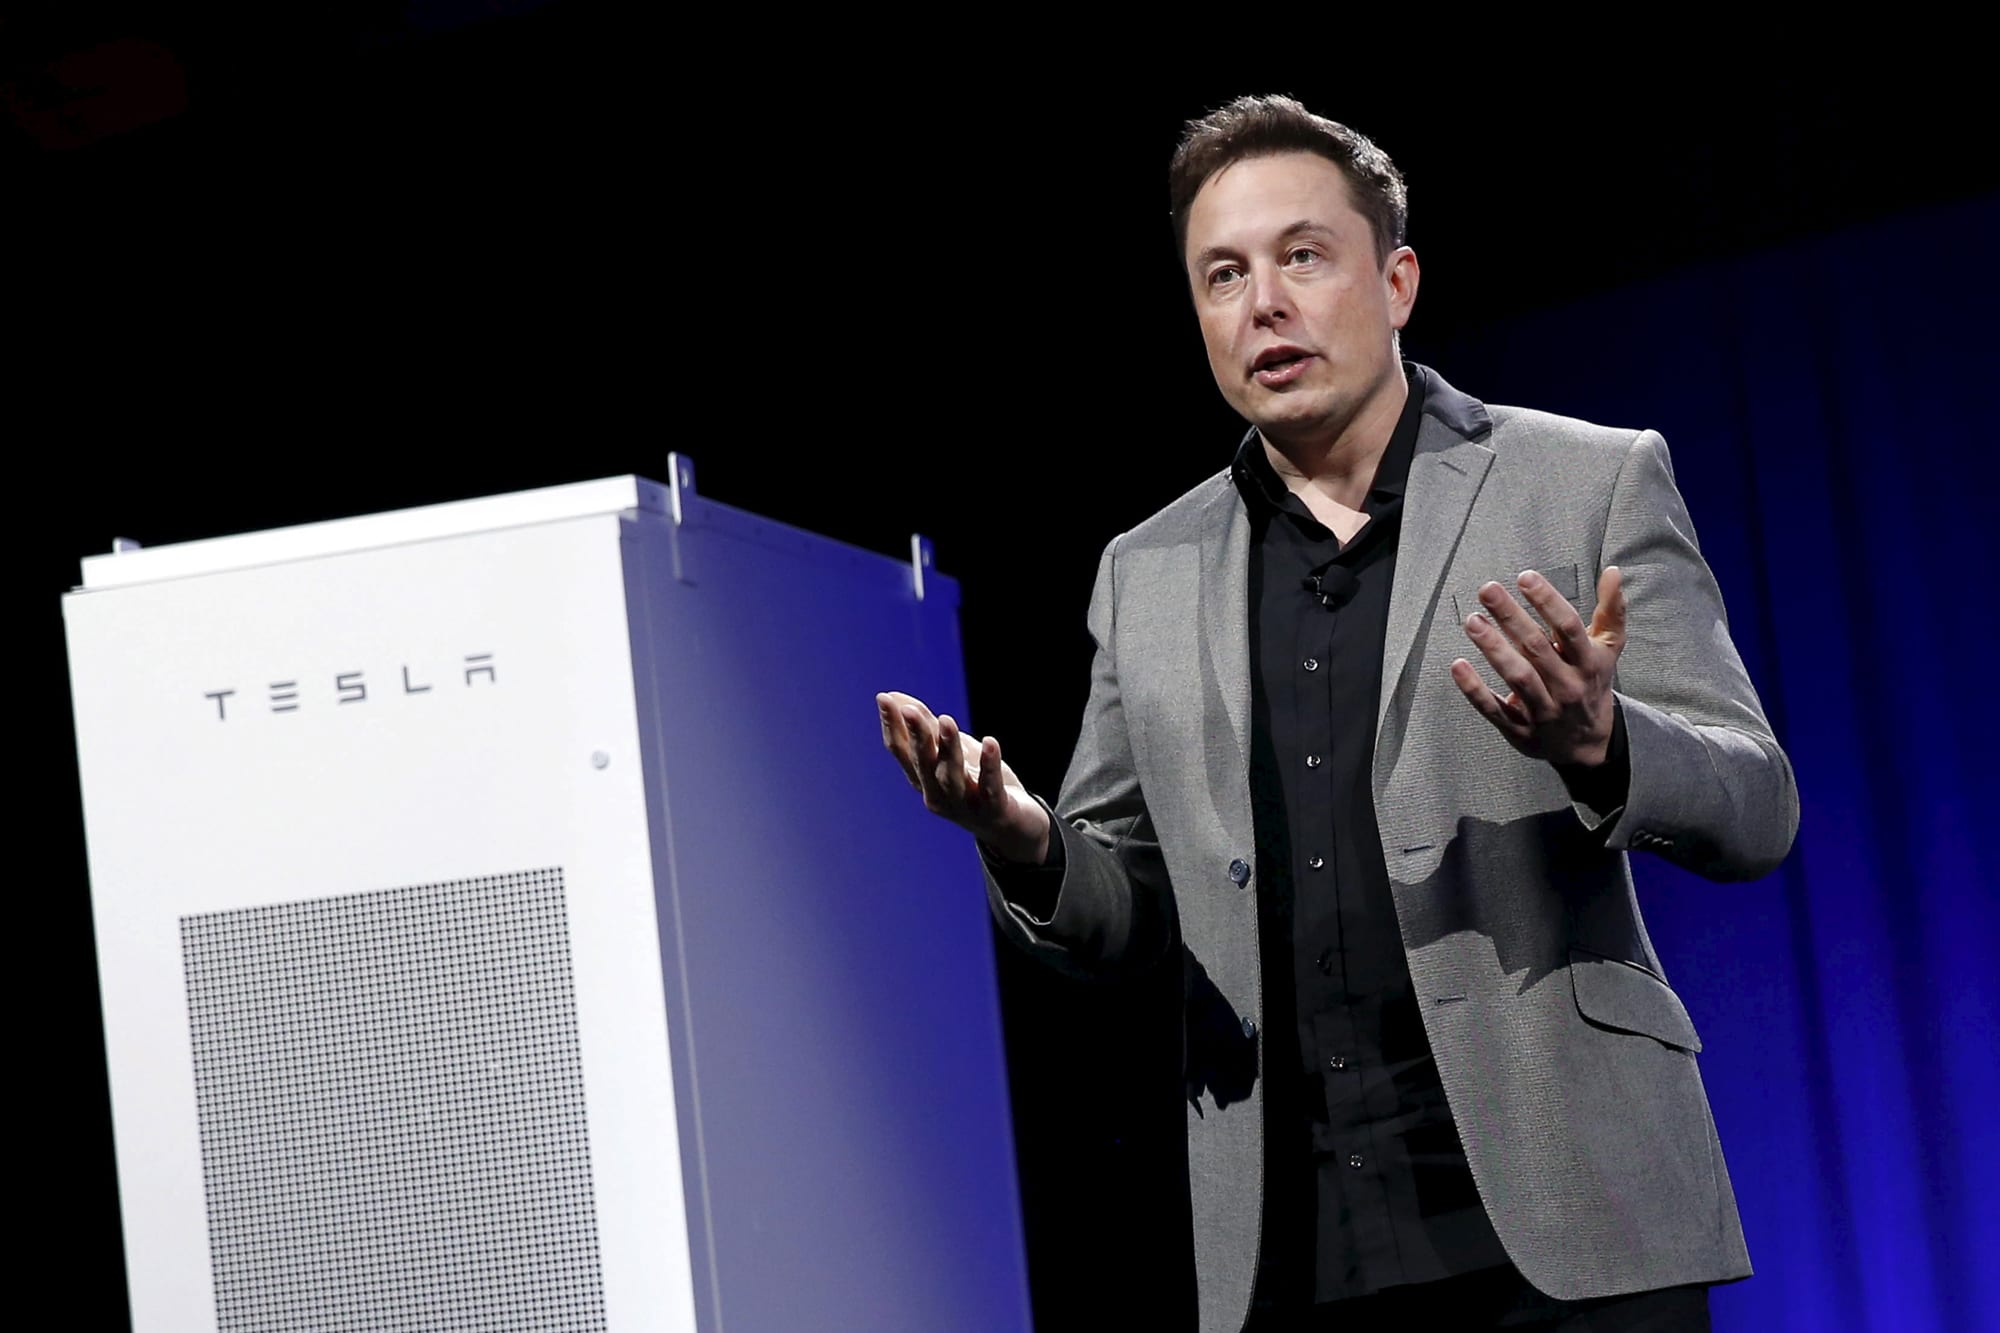 Tesla files to become an electricity provider in Texas